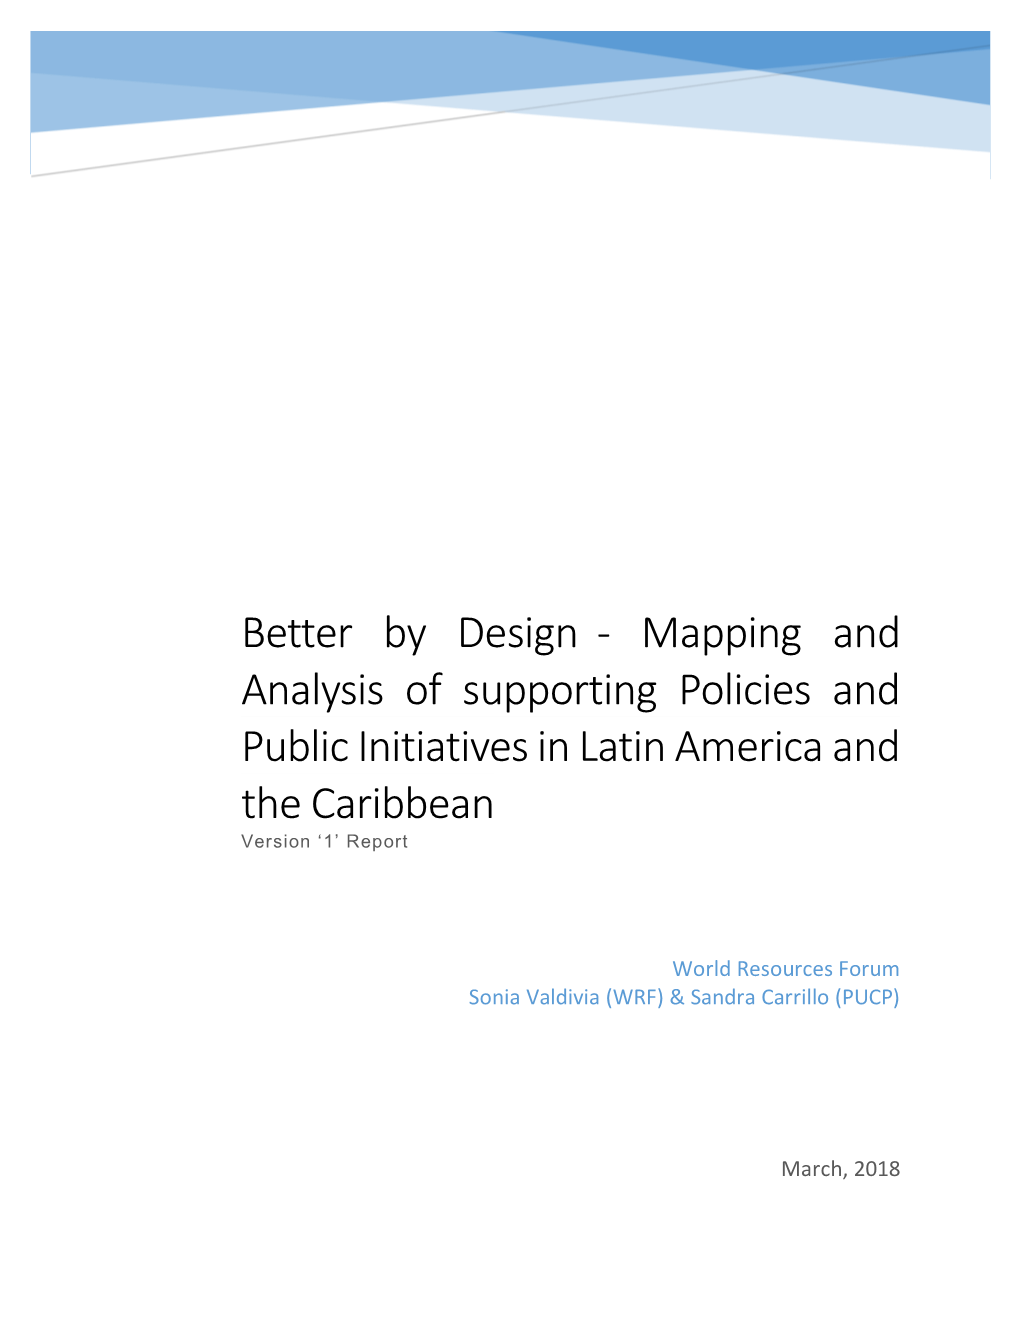 Mapping and Analysis of Supporting Policies and Public Initiatives in Latin America and the Caribbean Version ‘1’ Report